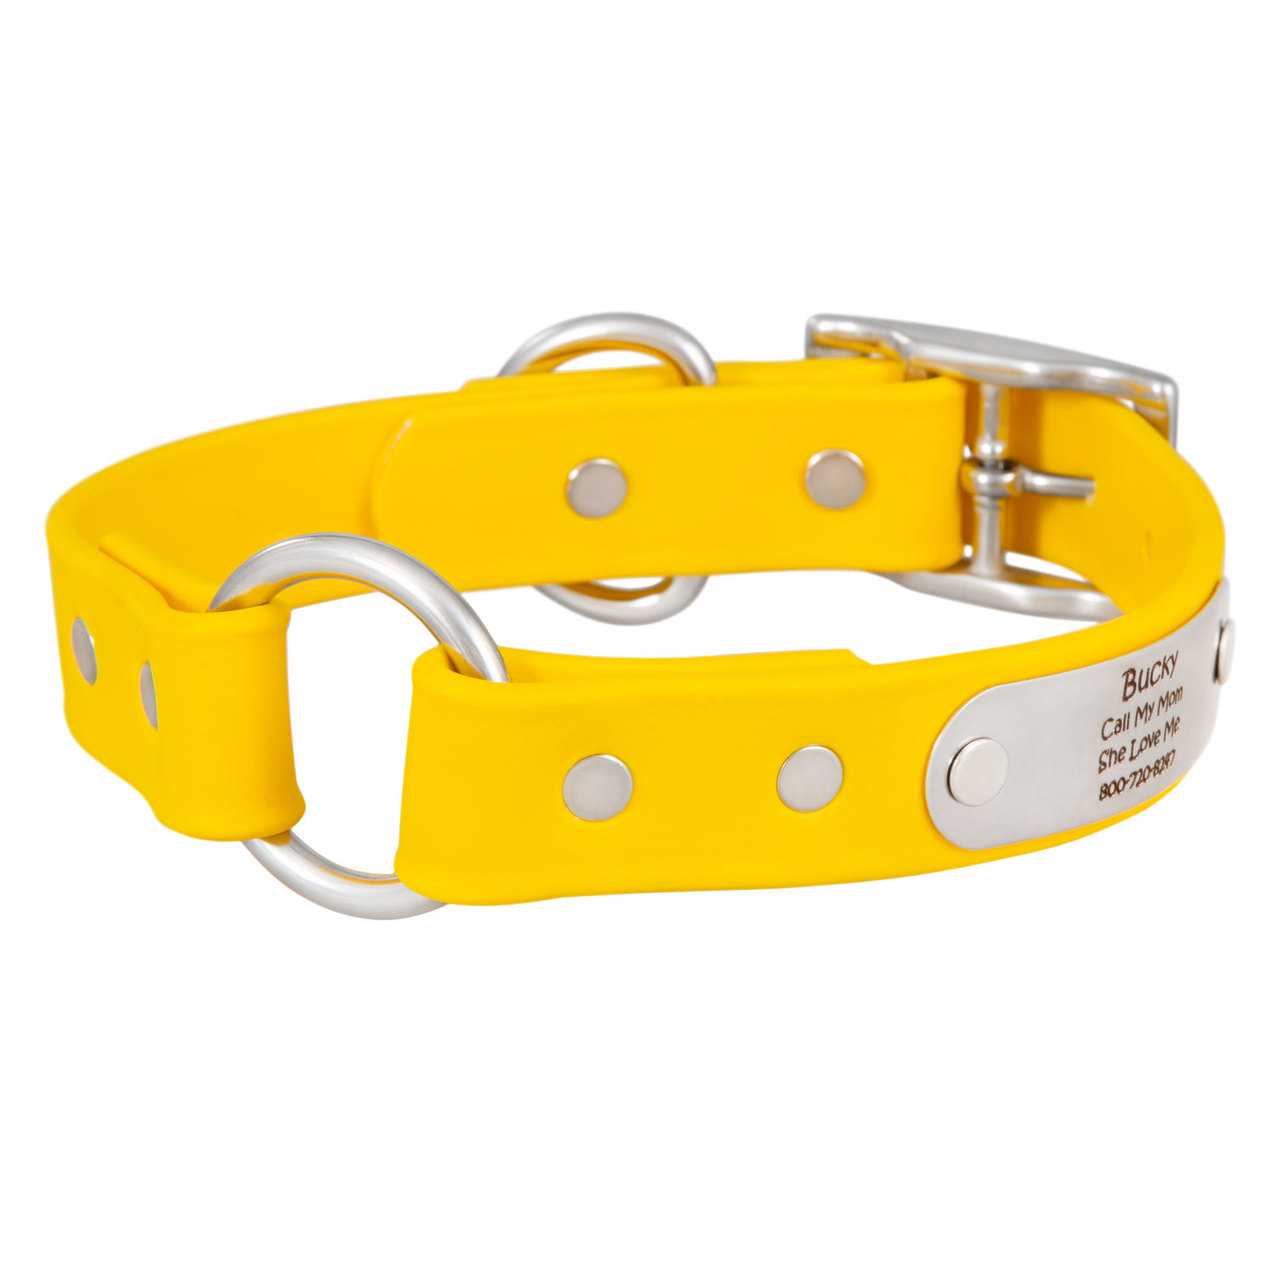 Waterproof Safety Collar with Nameplate dogIDs